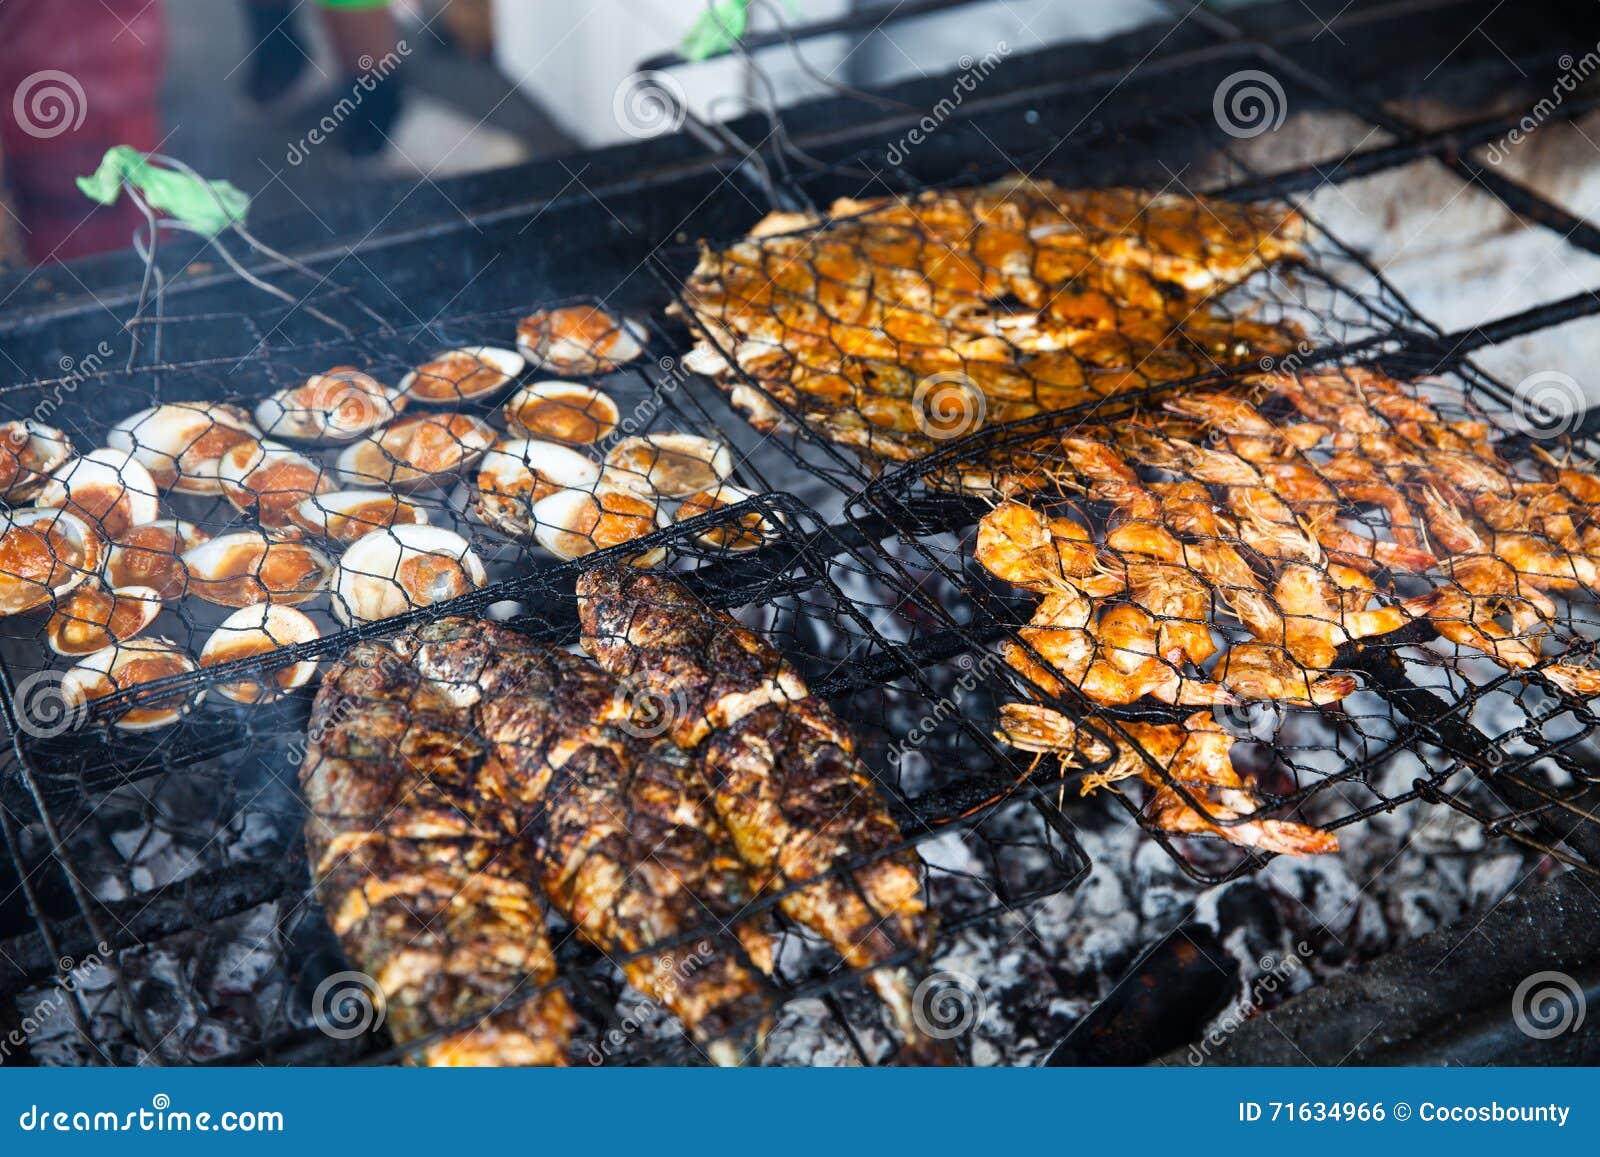 Cooking BBQ Seafood On Background Fire Stock Photo  Image of background, dairy: 71634966